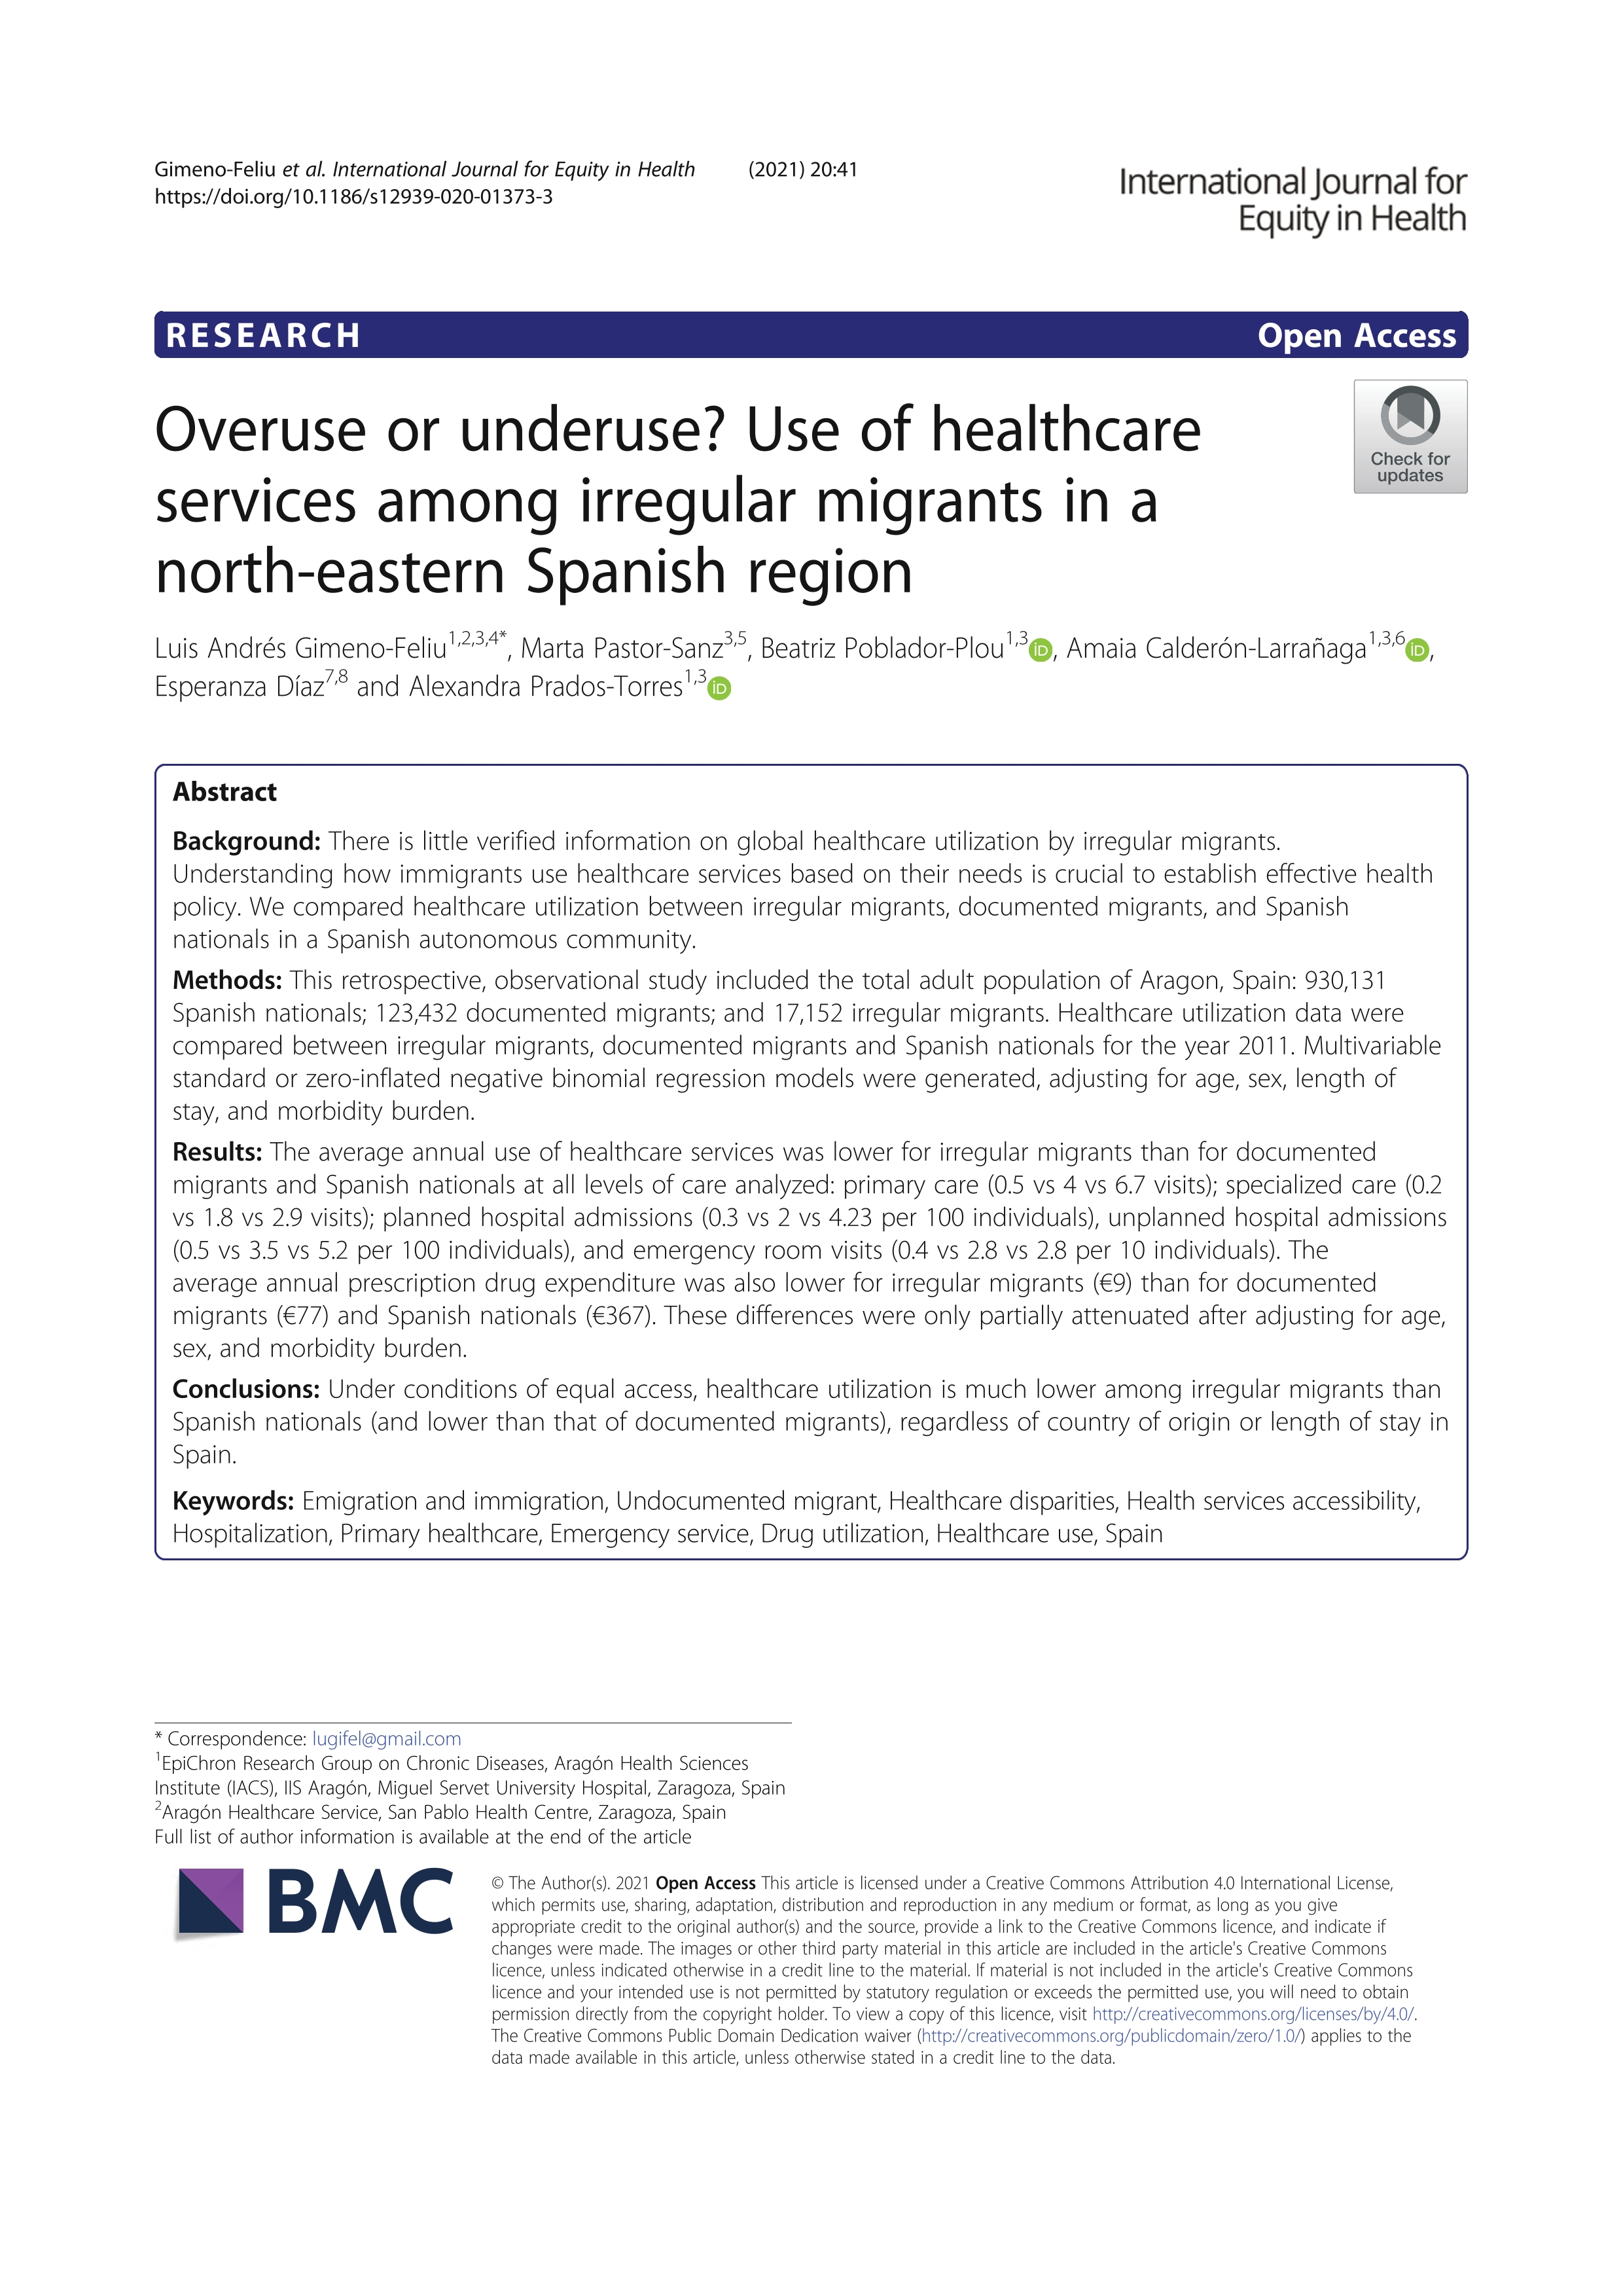 Overuse or underuse? Use of healthcare services among irregular migrants in a north-eastern Spanish region